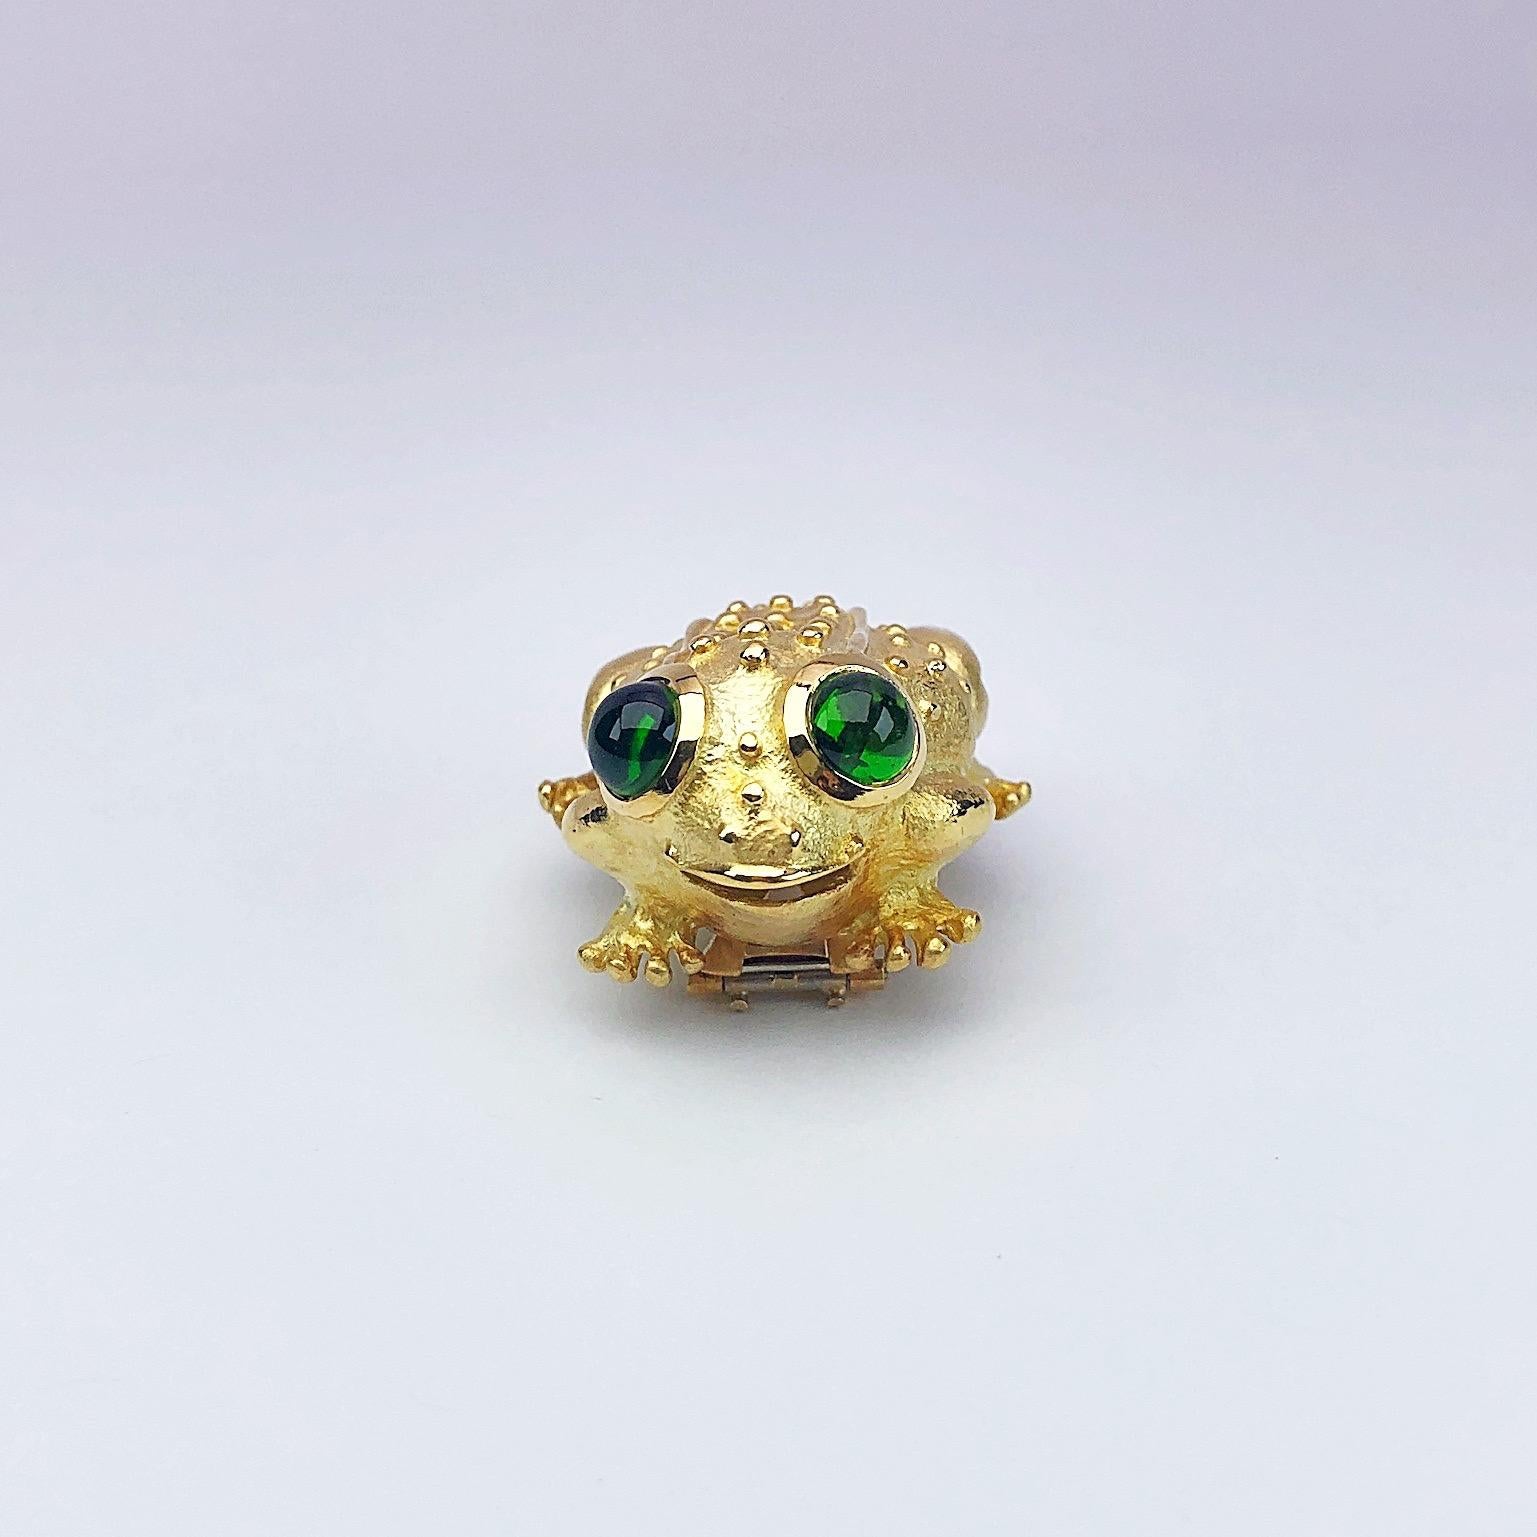 18 karat yellow gold satin finished bullfrog brooch. His eyes are set with cabochon green tourmaline stones. Perfect for the frog collector.
The brooch measures 1.25 x 1.25
Stamped 18 K Jb